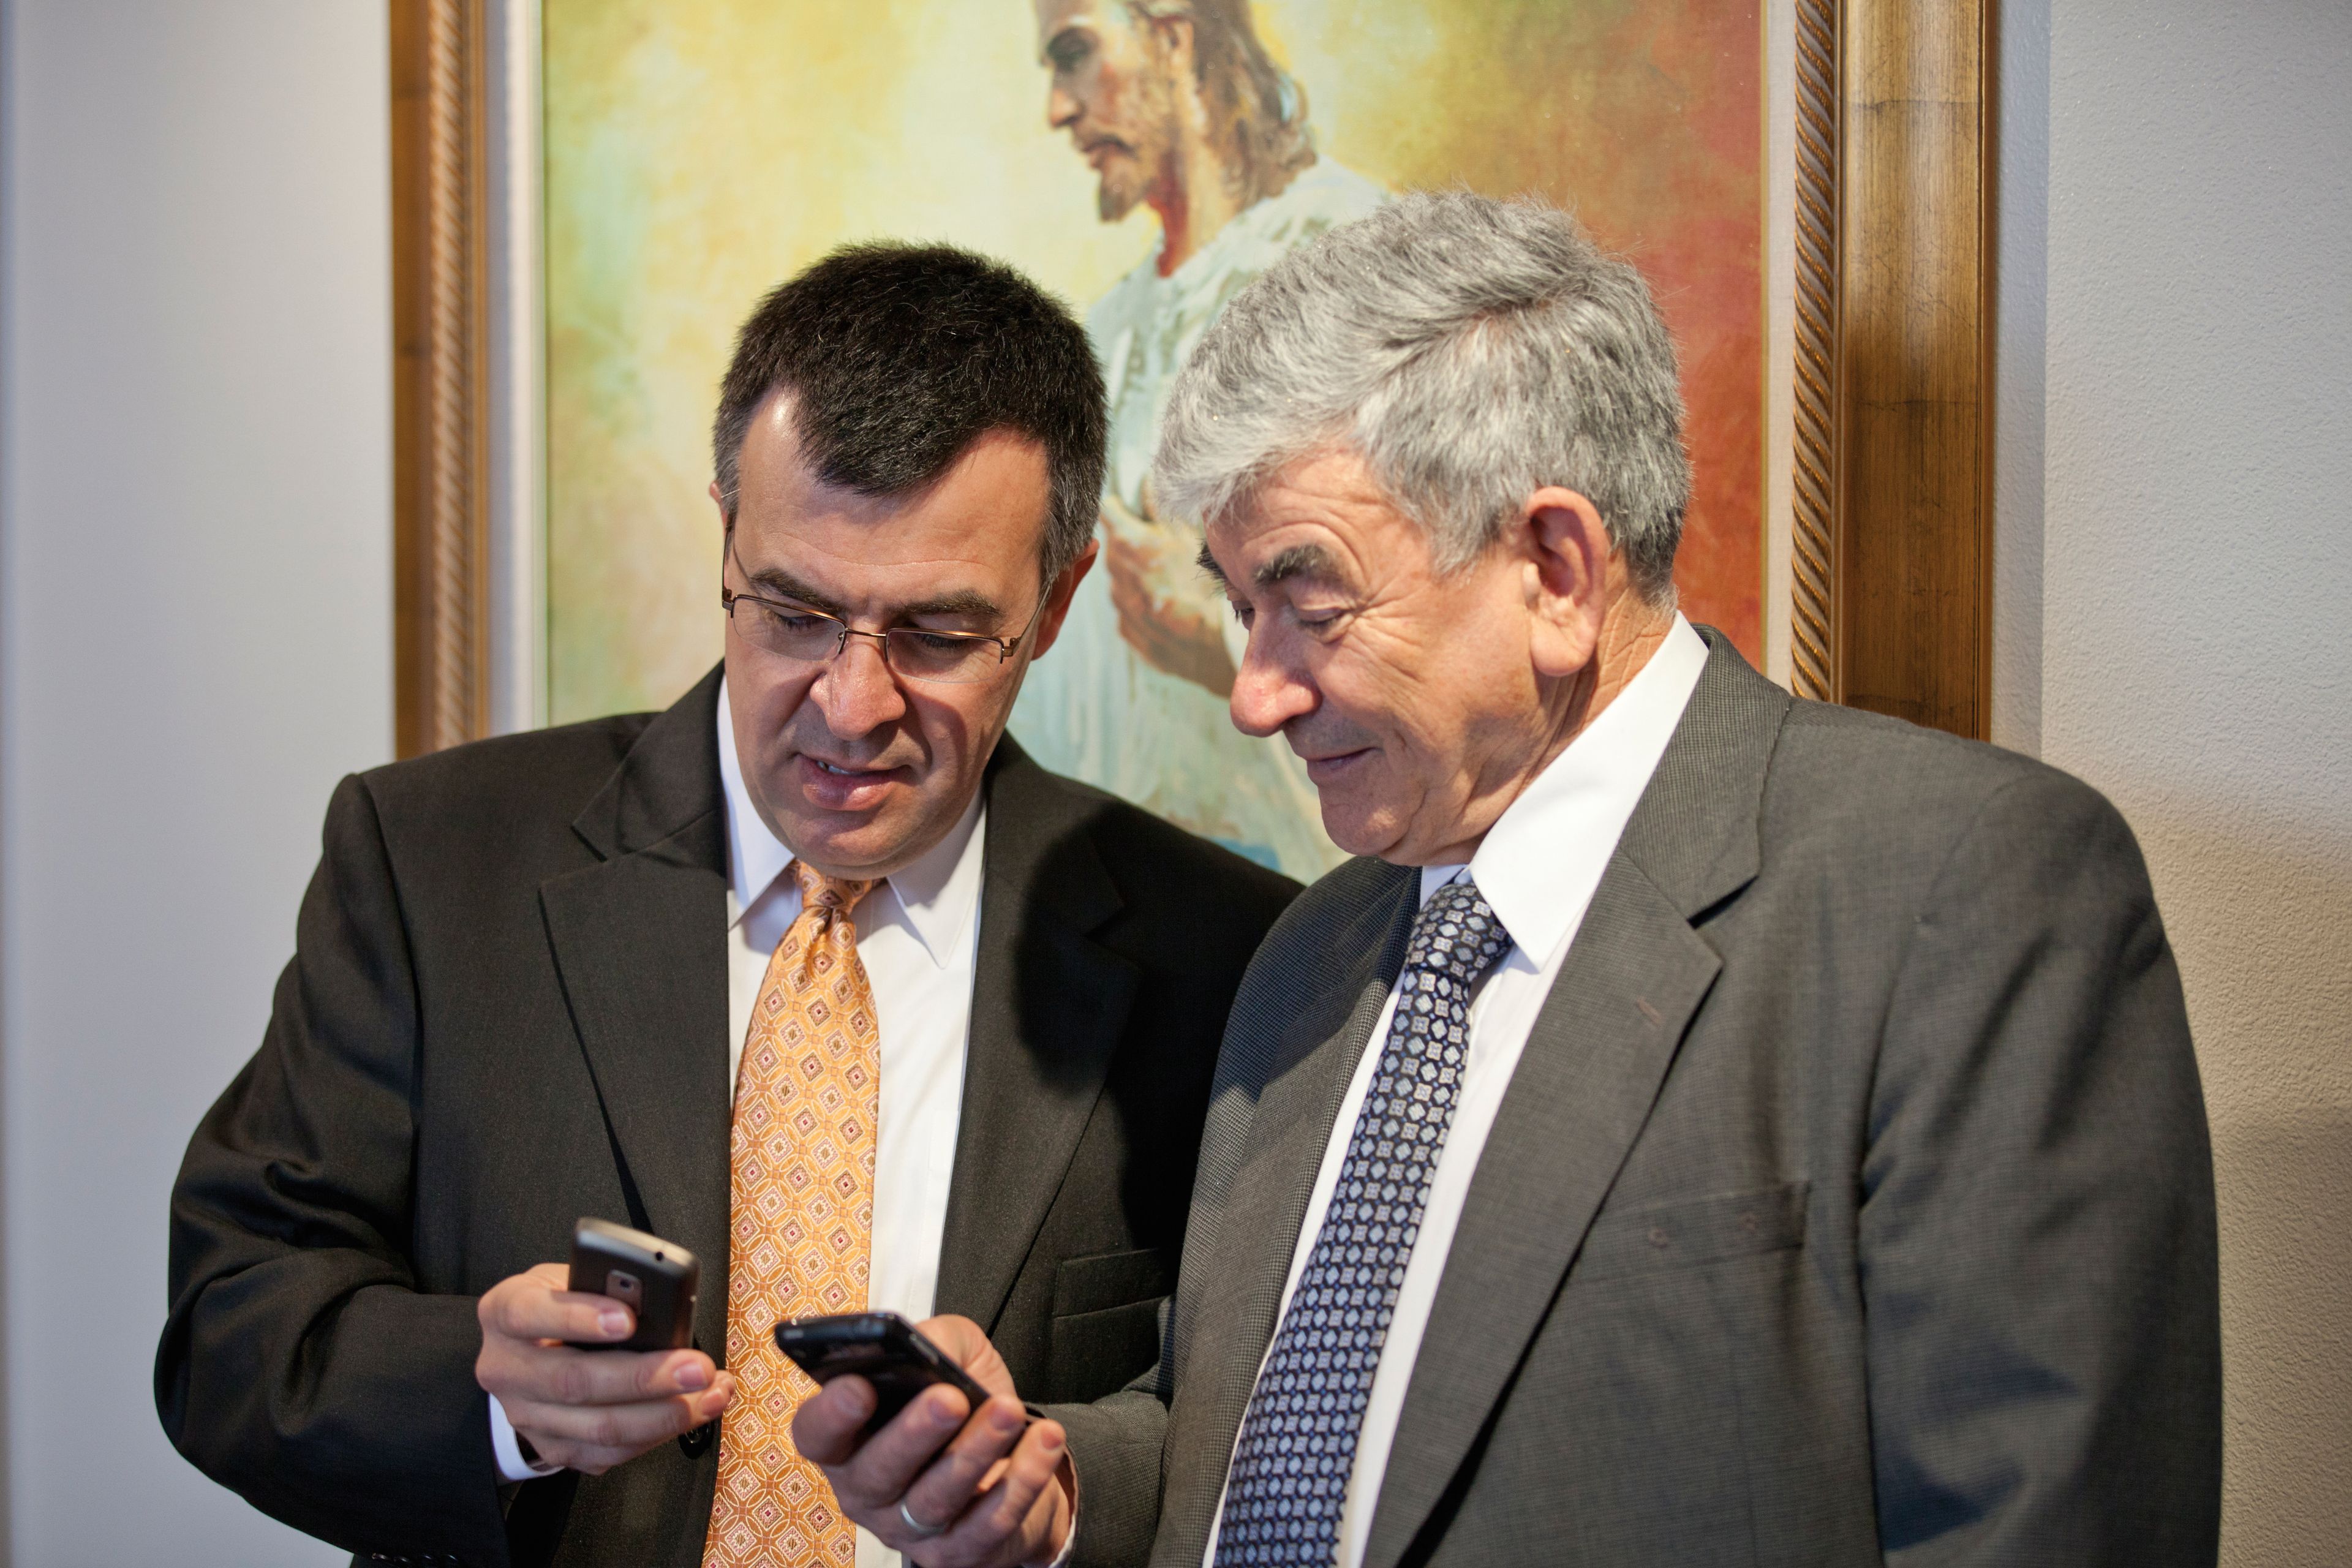 Two older men stand in a meetinghouse and look at the smartphones in their hands.